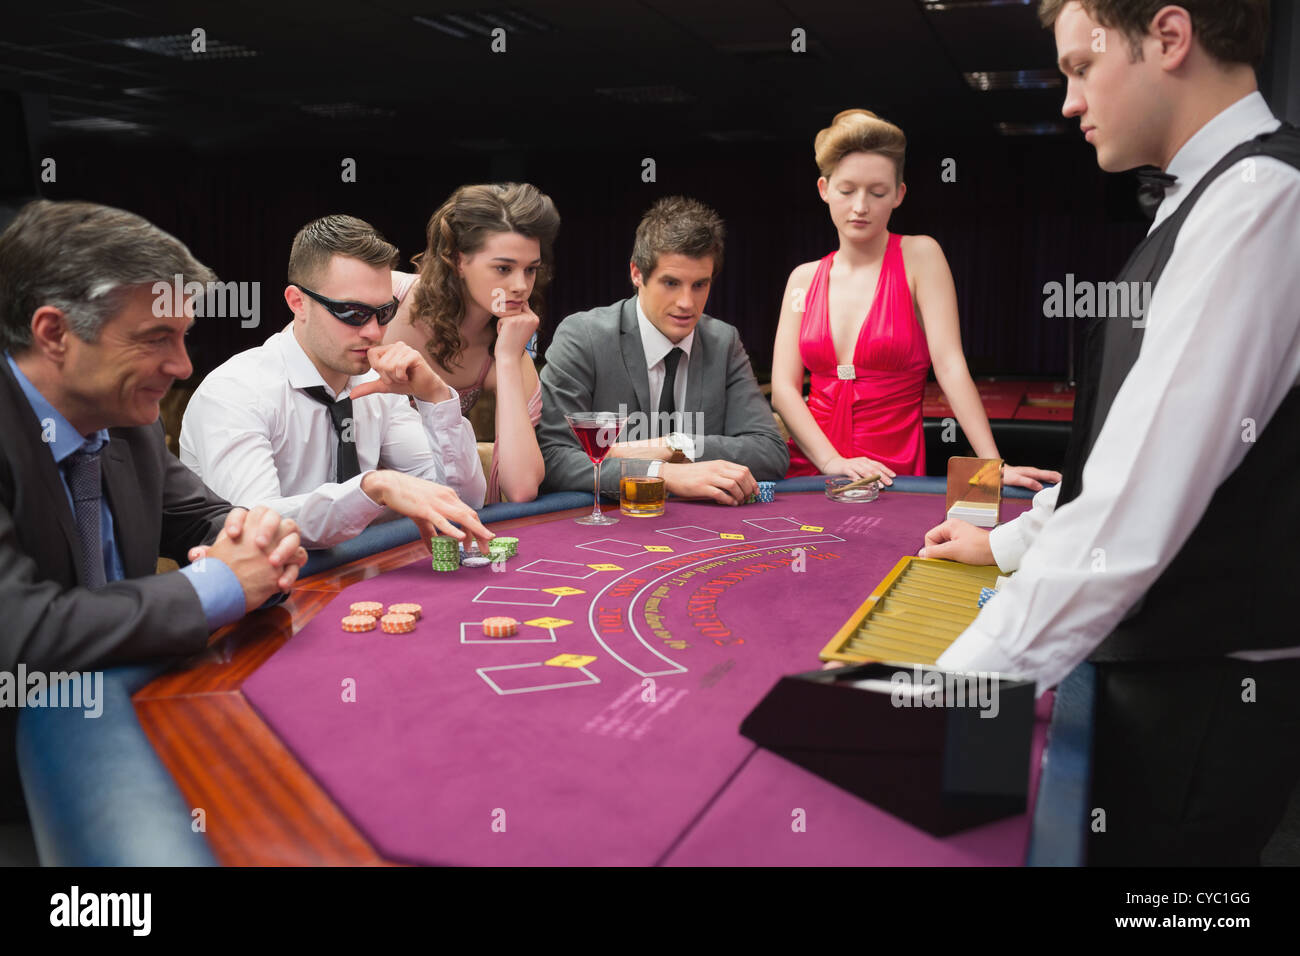 People sitting at table playing poker Stock Photo